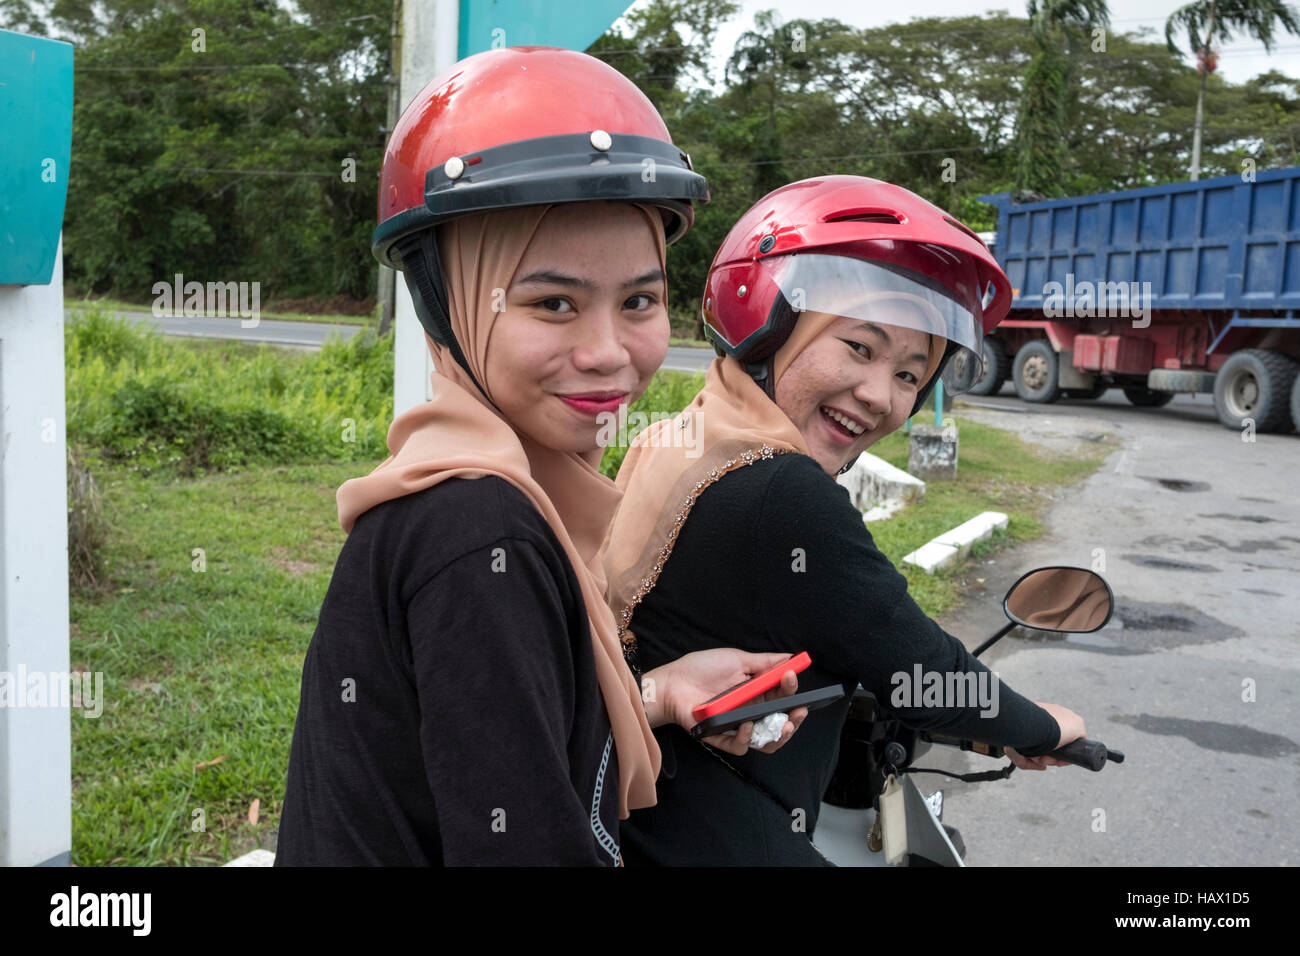 Two identically dressed Muslim girls, sit on a motor scooter in Mukah, Mukah Division, Sarawak, Malaysia Stock Photo